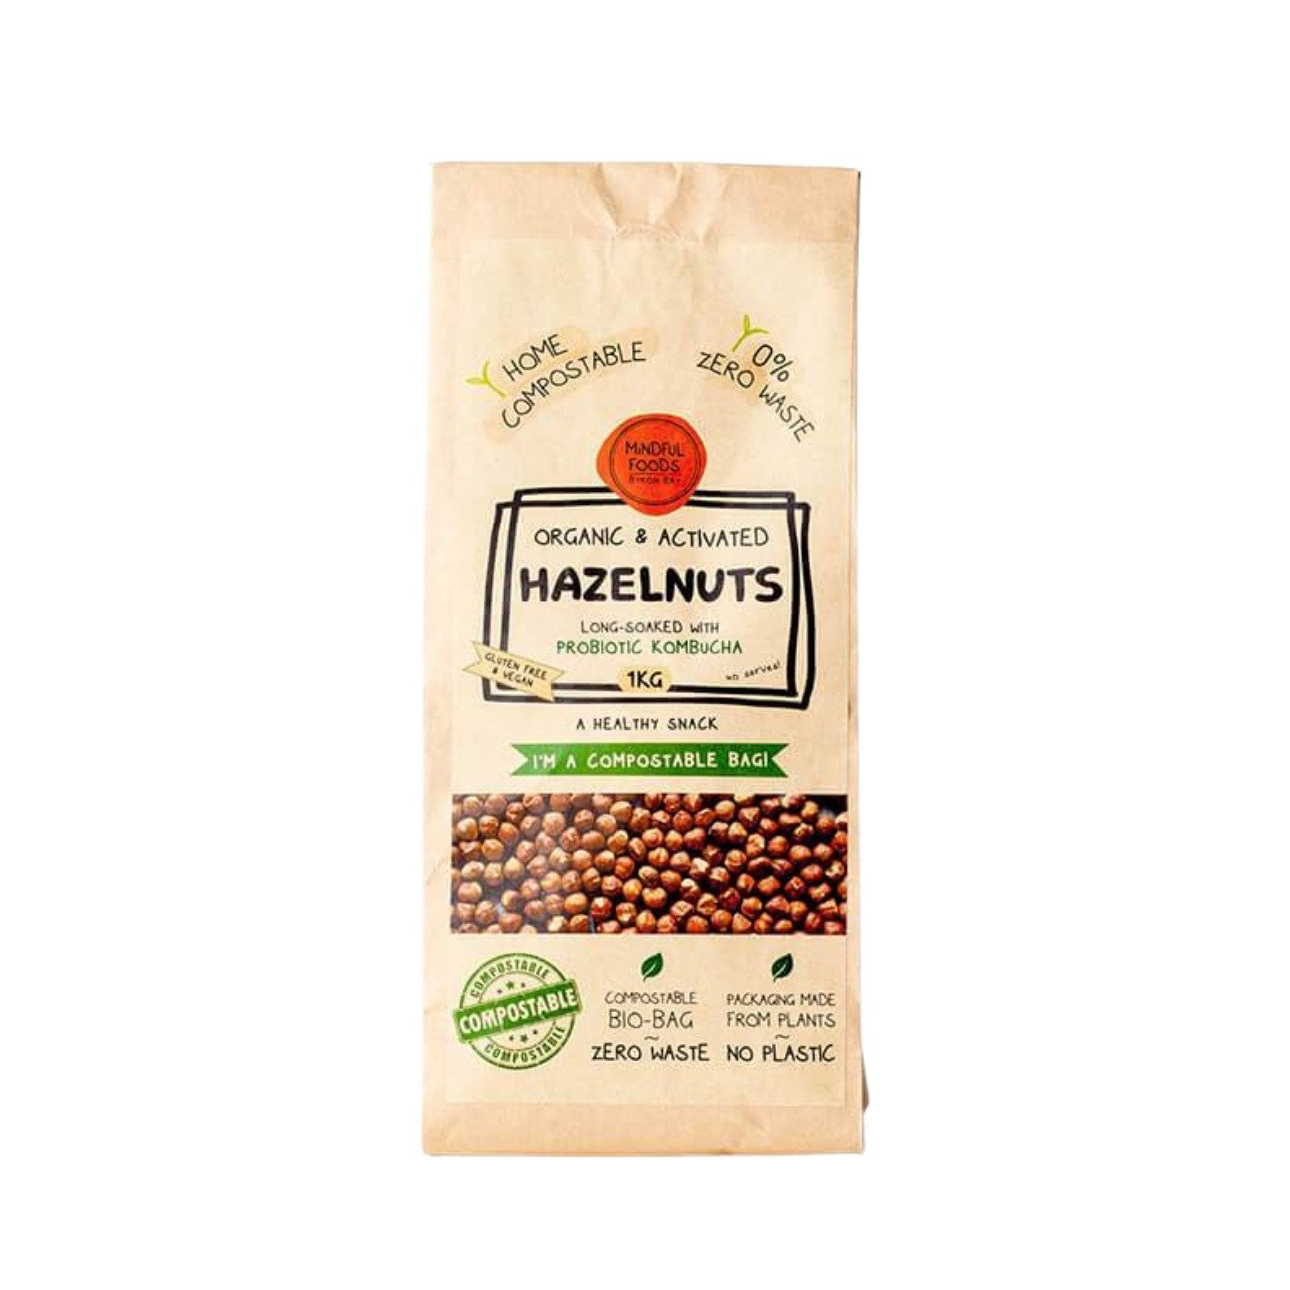 Mindful Foods Hazelnuts 250g, 500g Or 1kg (Organic & Activated)